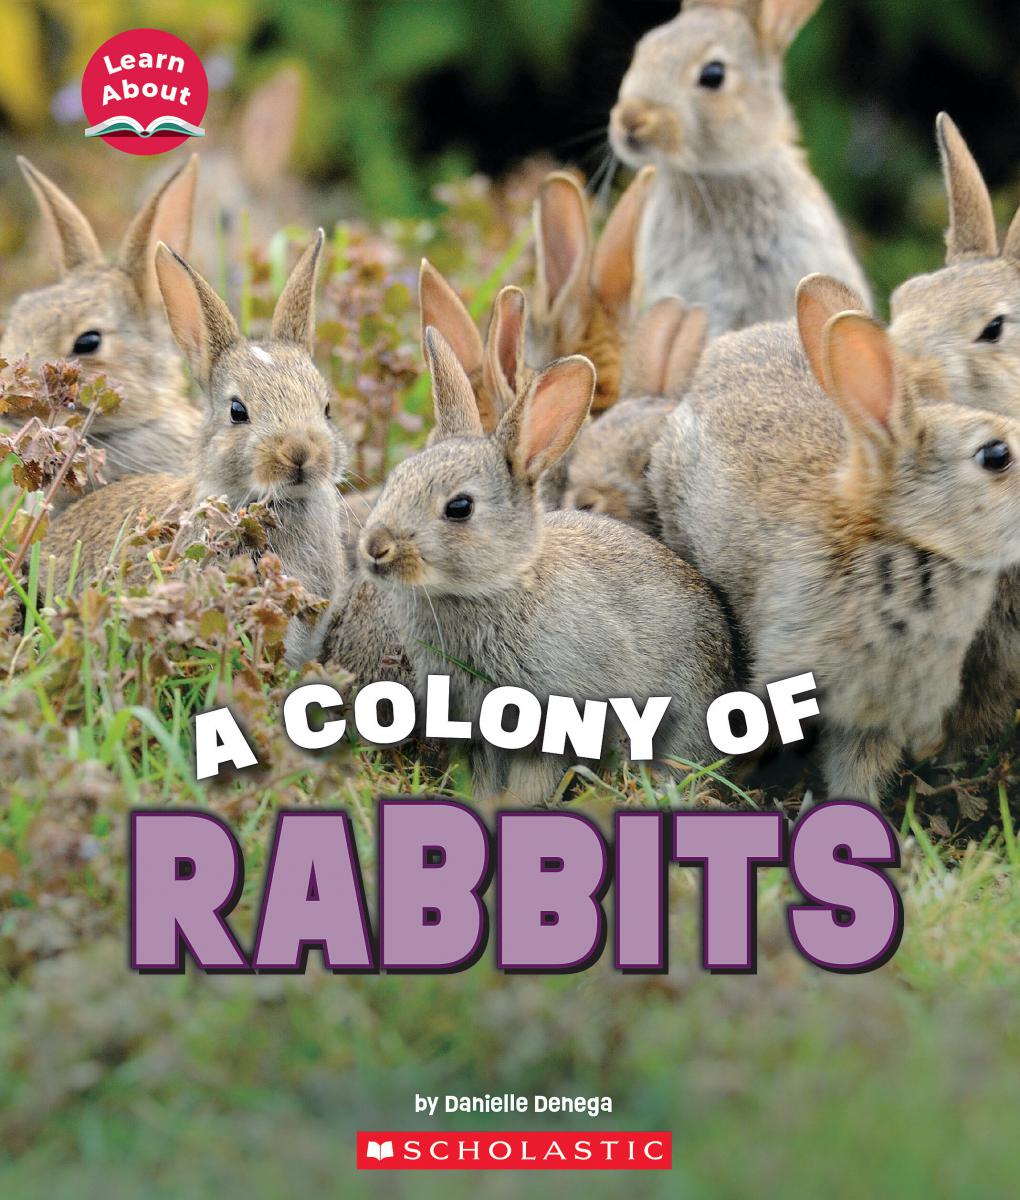 A Colony of Rabbits (Learn About: Animals) | Documentary